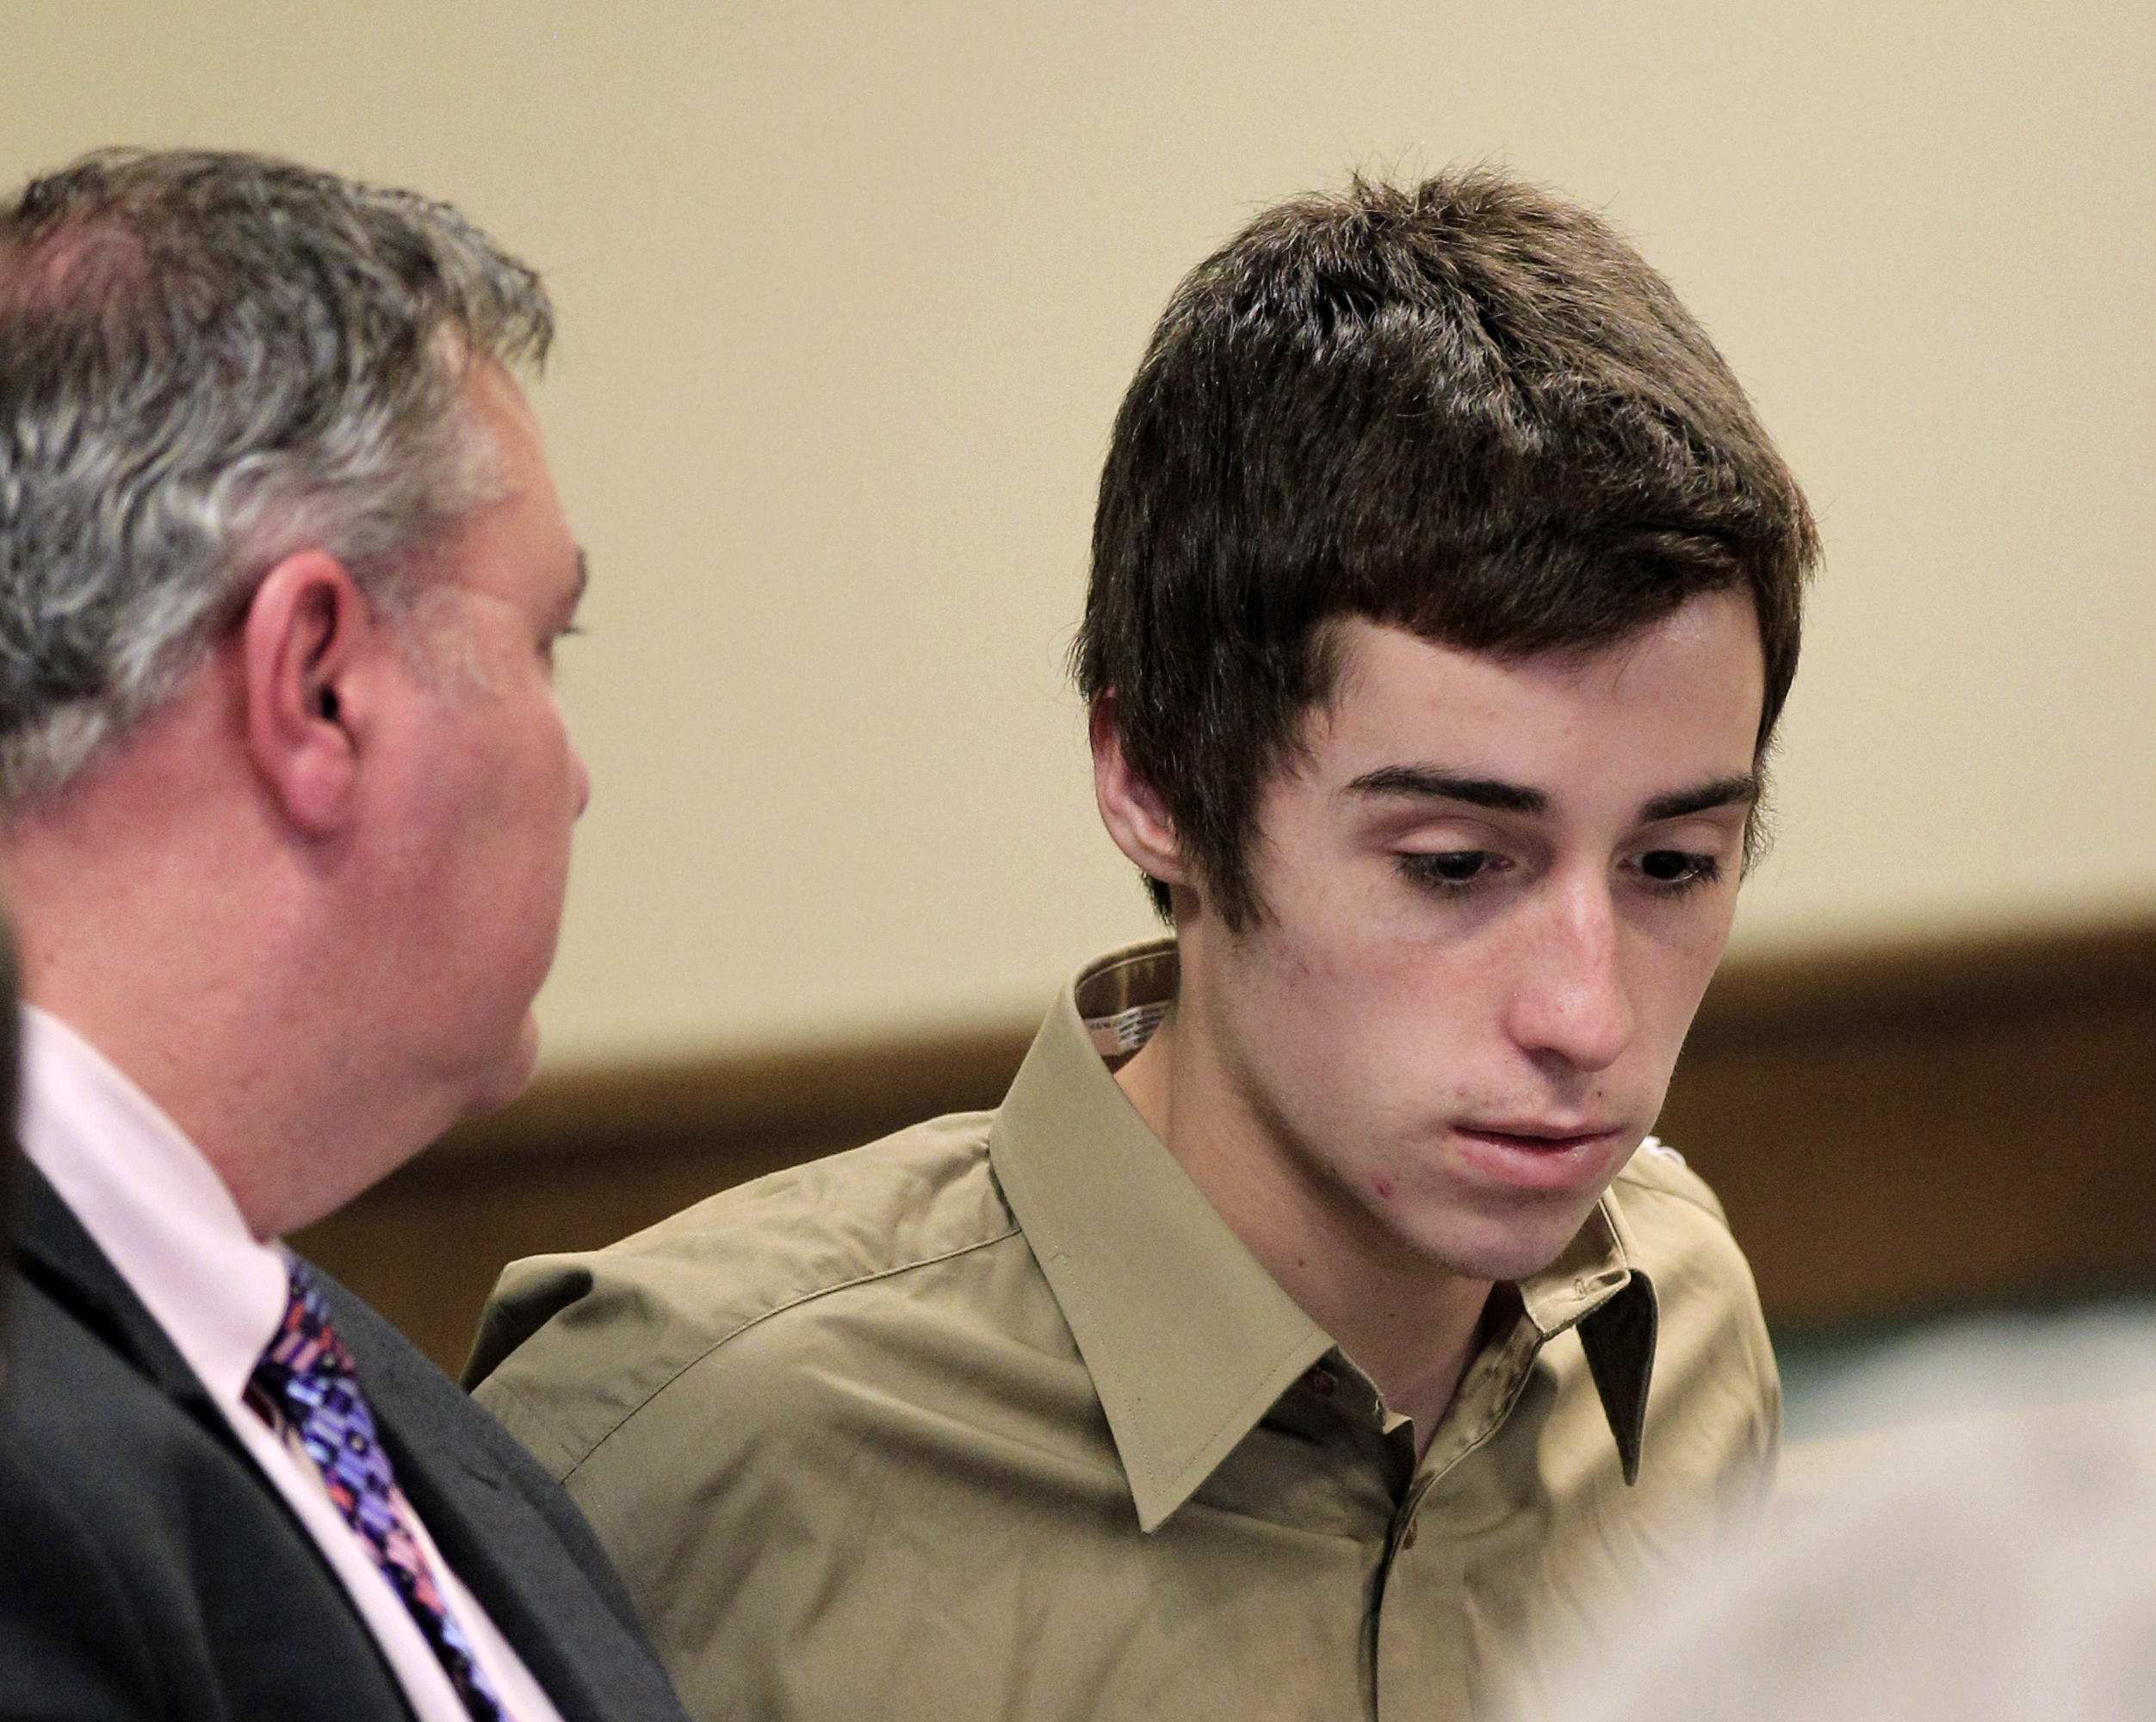 PHOTO: T.J. Lane, right, listens to his attorney during court proceedings in Juvenile Court, March 6, 2012, in Chardon, Ohio.